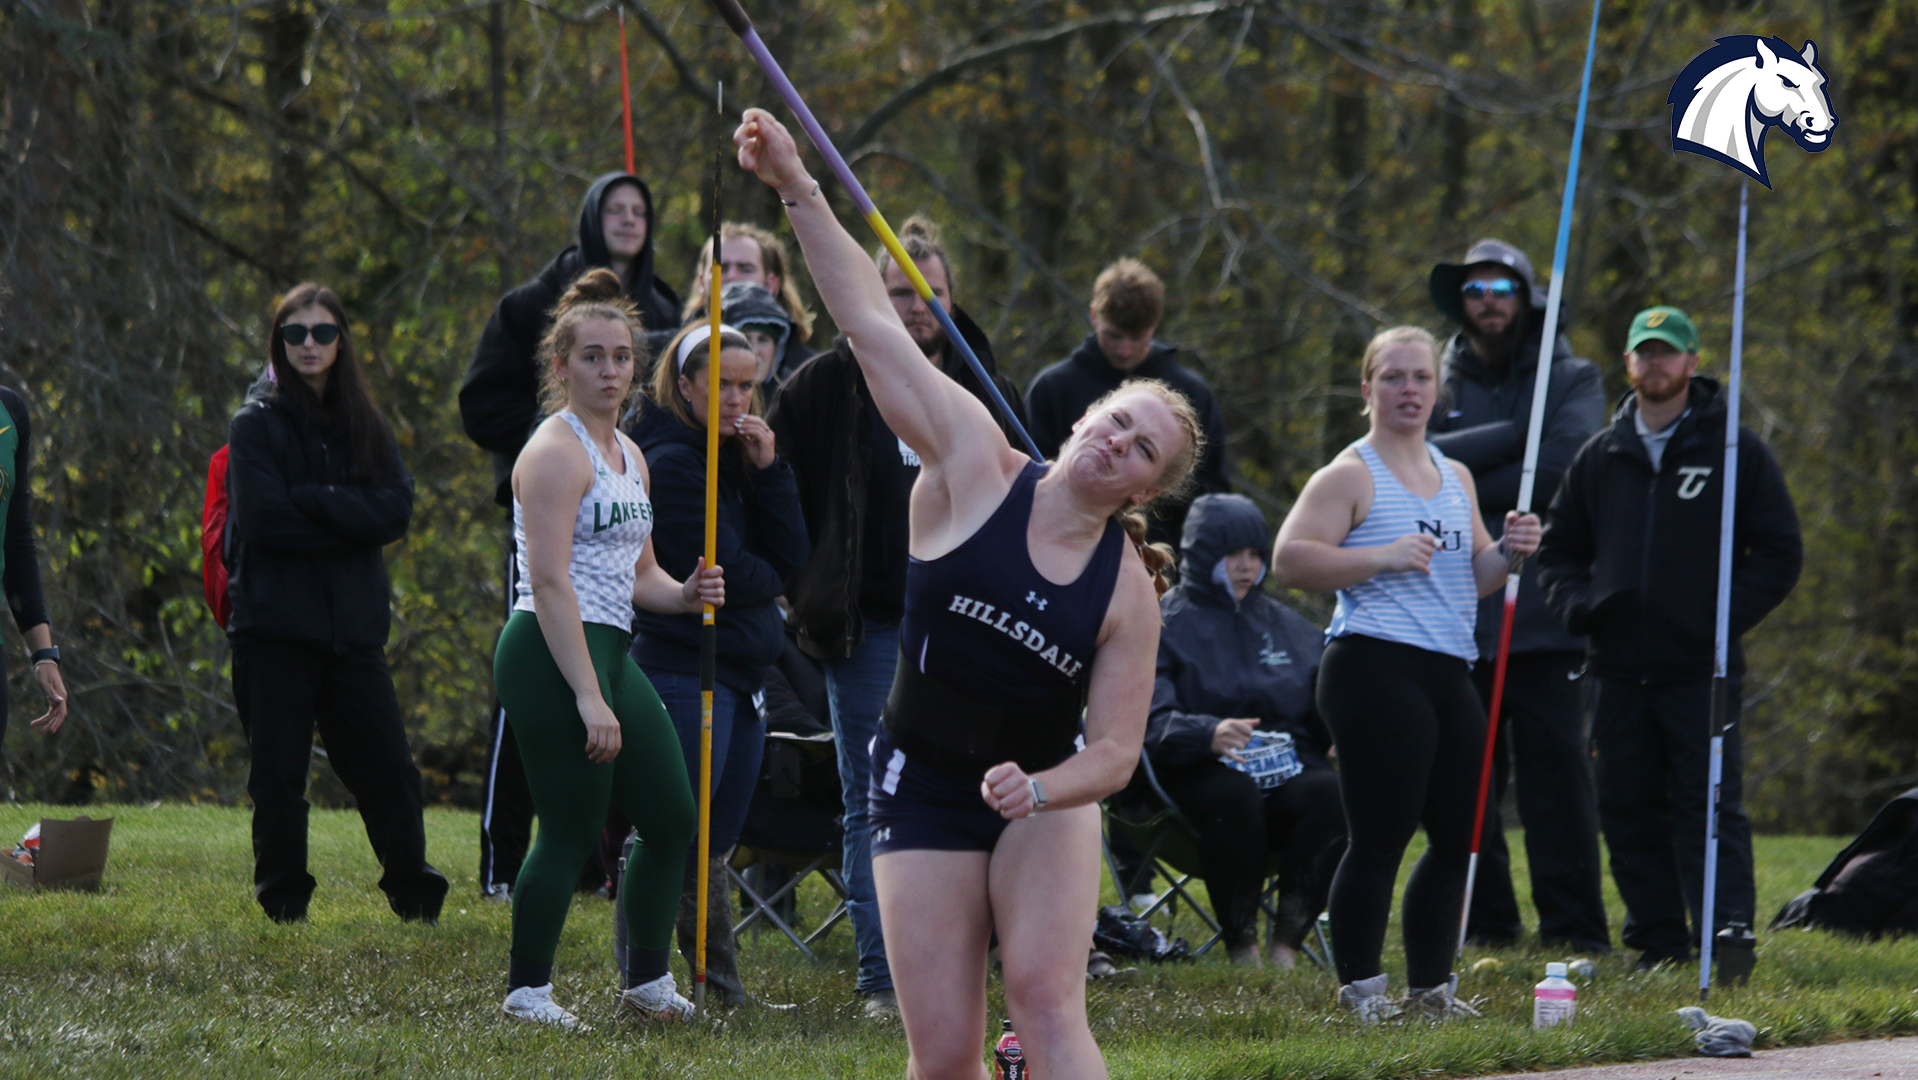 Chargers' Eden Little repeats as javelin champ as G-MAC Outdoor Championships kick off